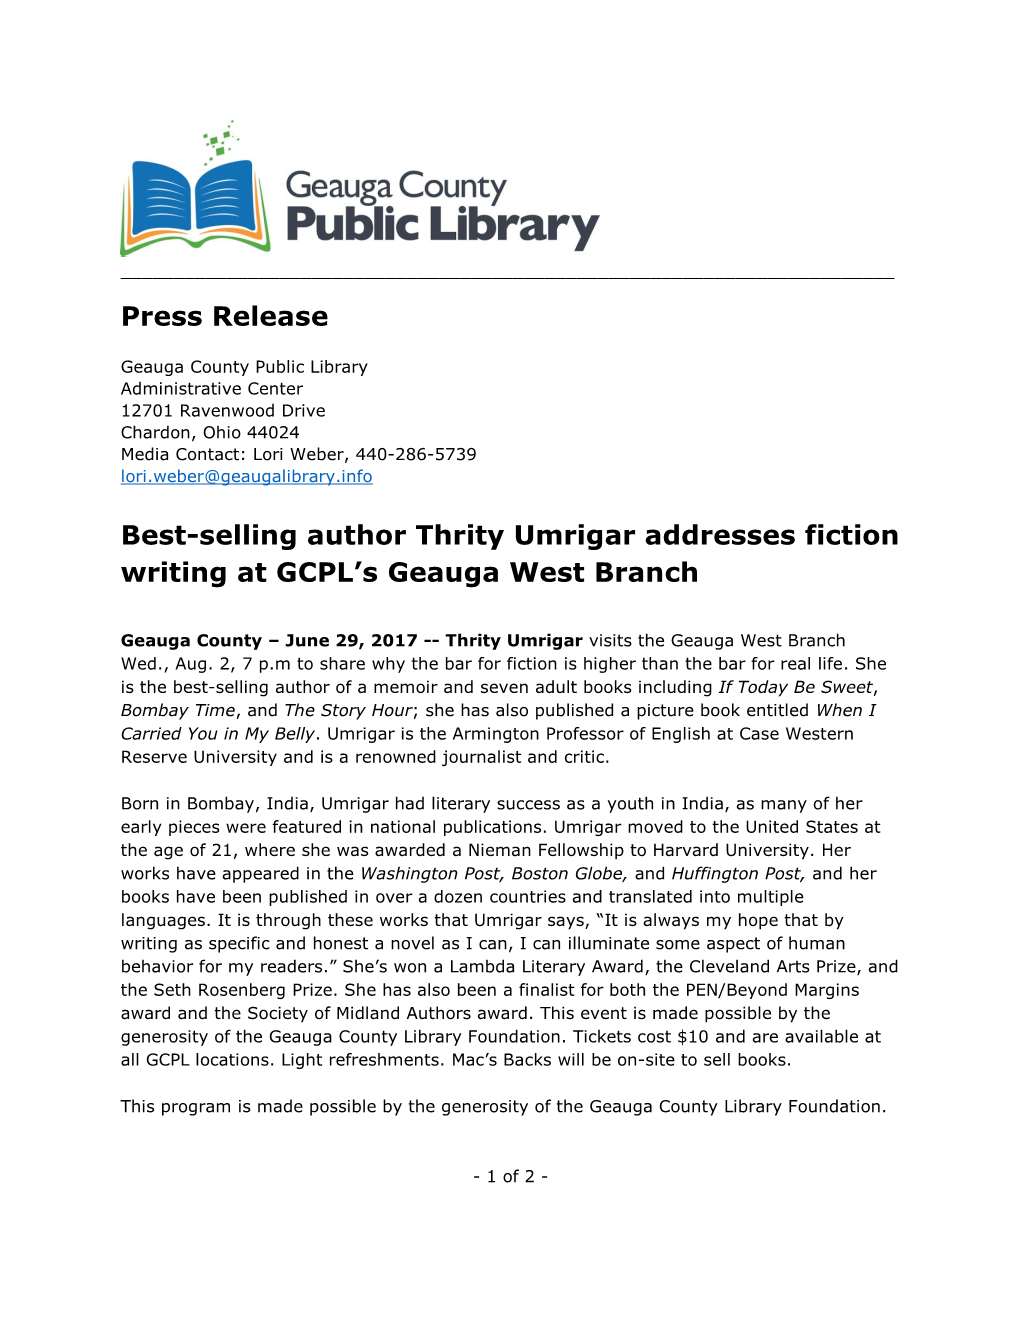 Press Release Best-Selling Author Thrity Umrigar Addresses Fiction